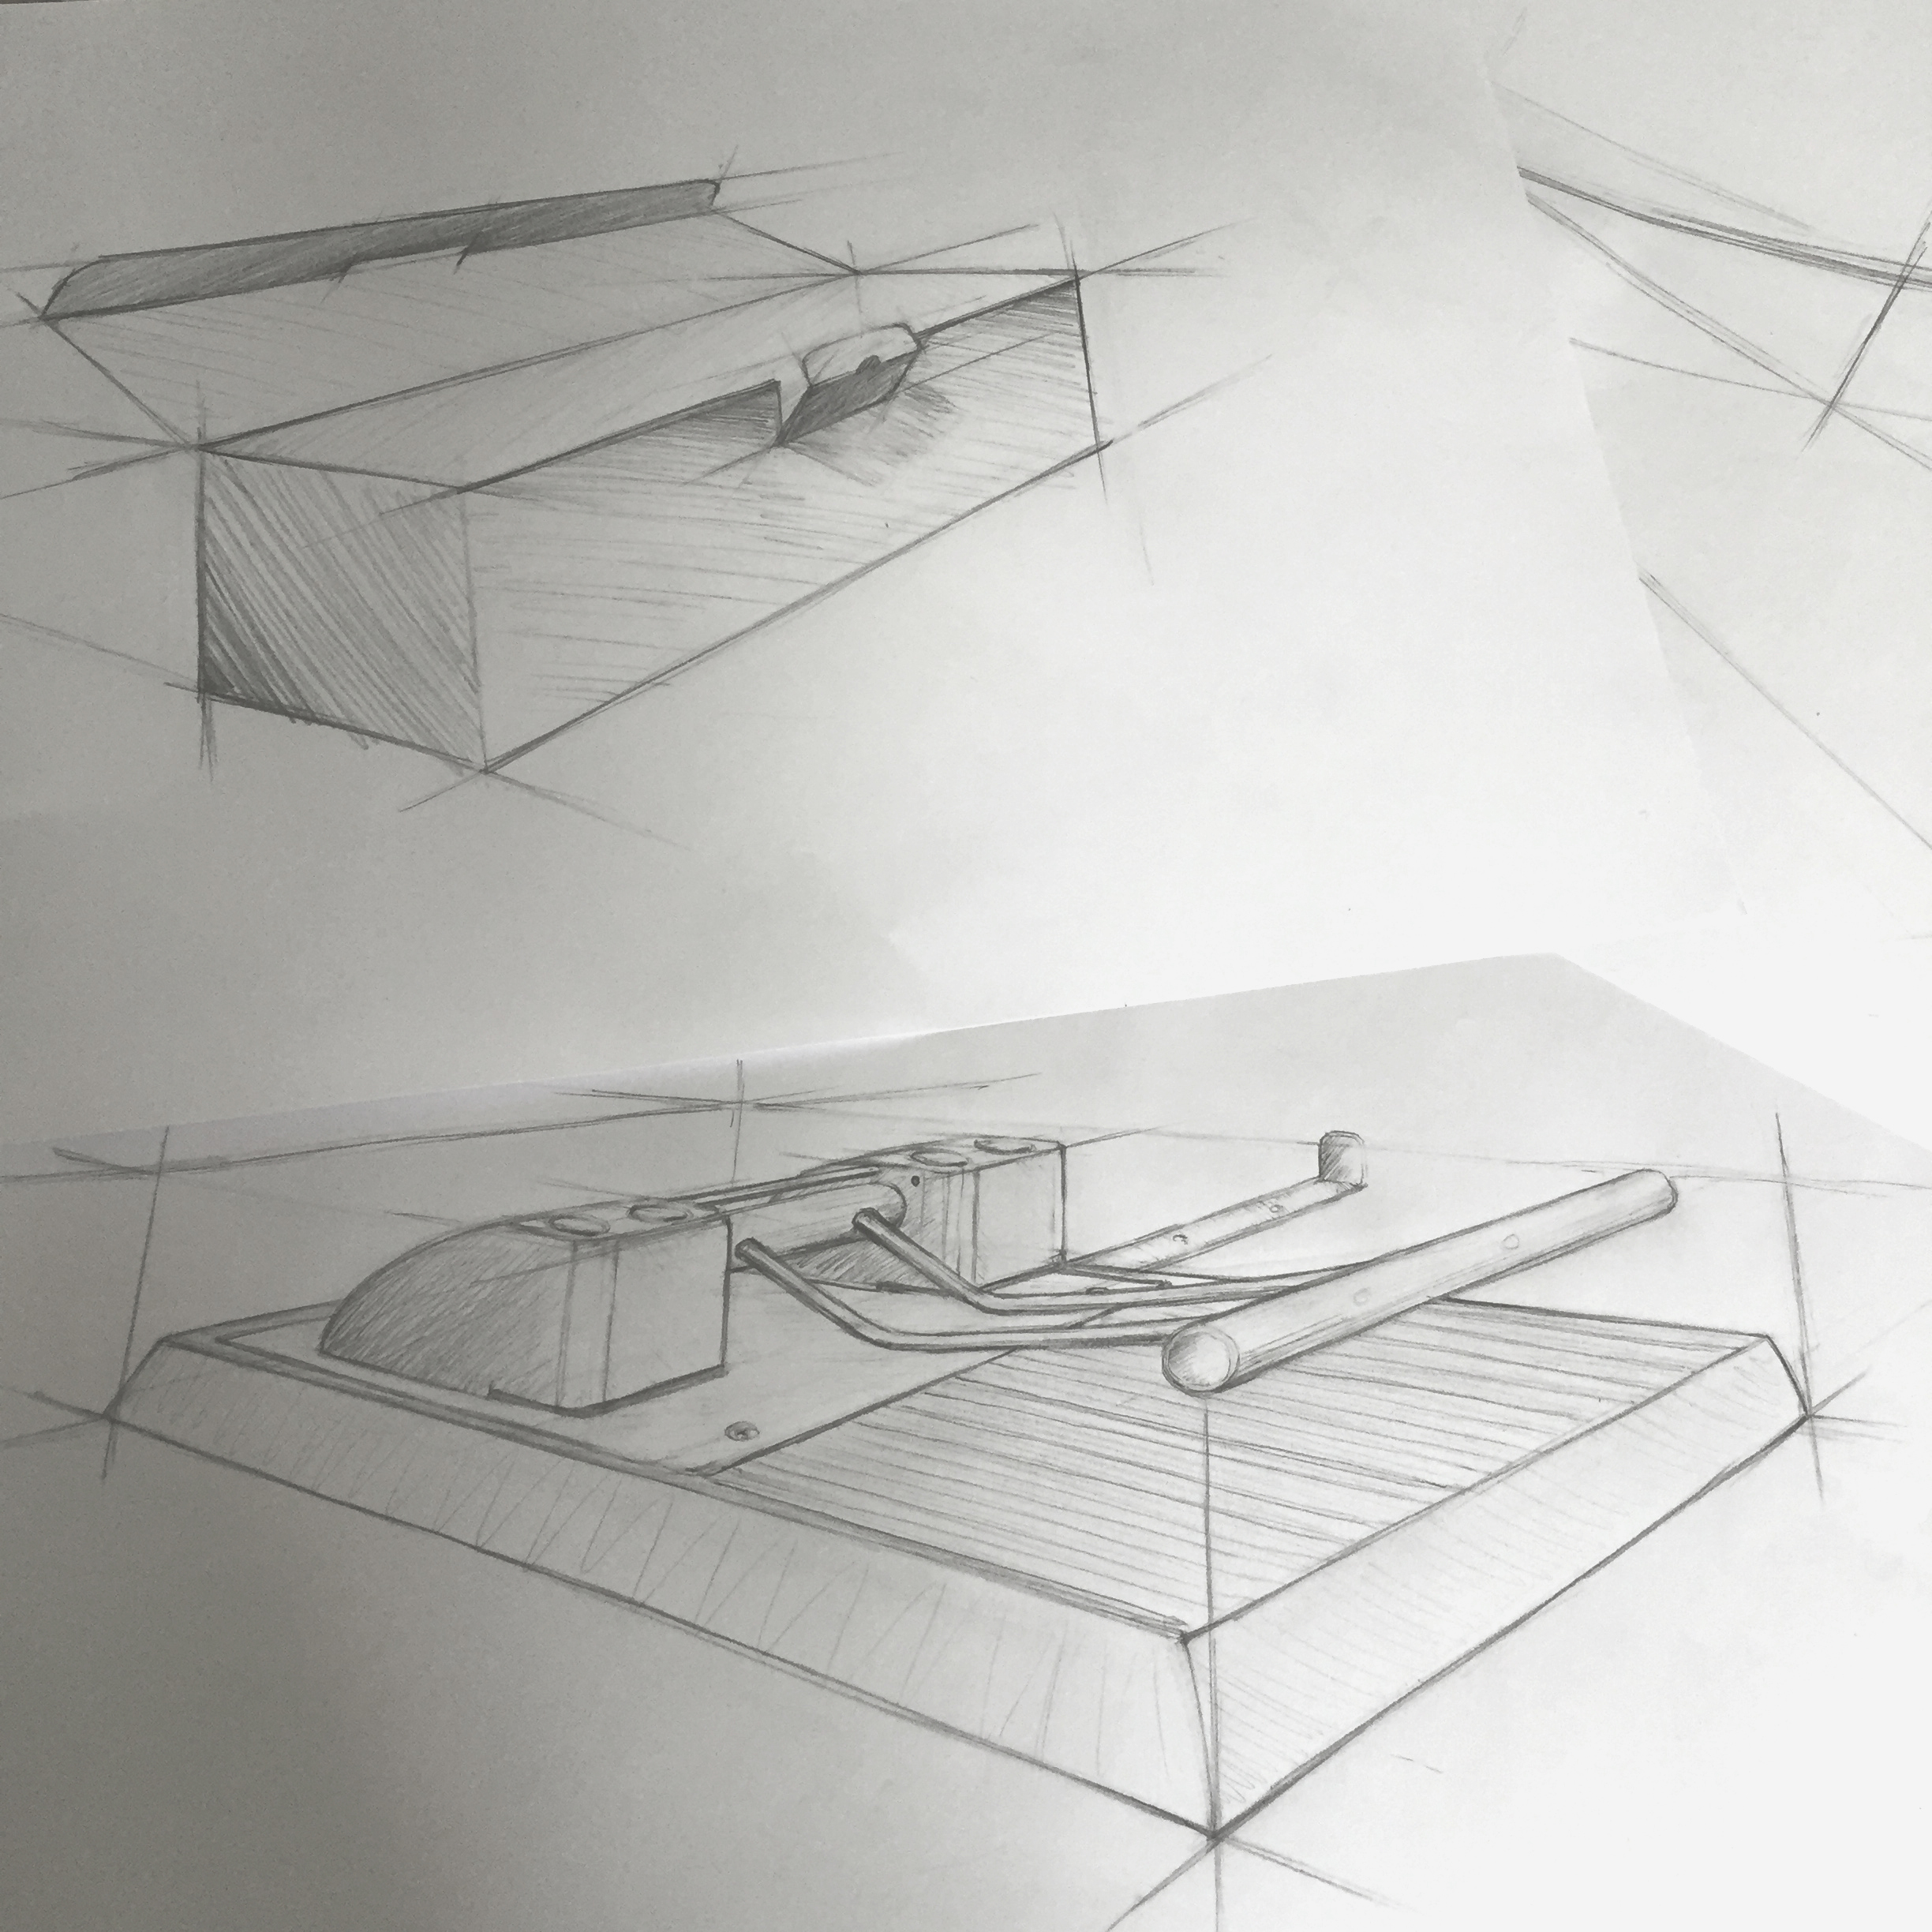 Technical drawings in perspective by Sebastian Galo